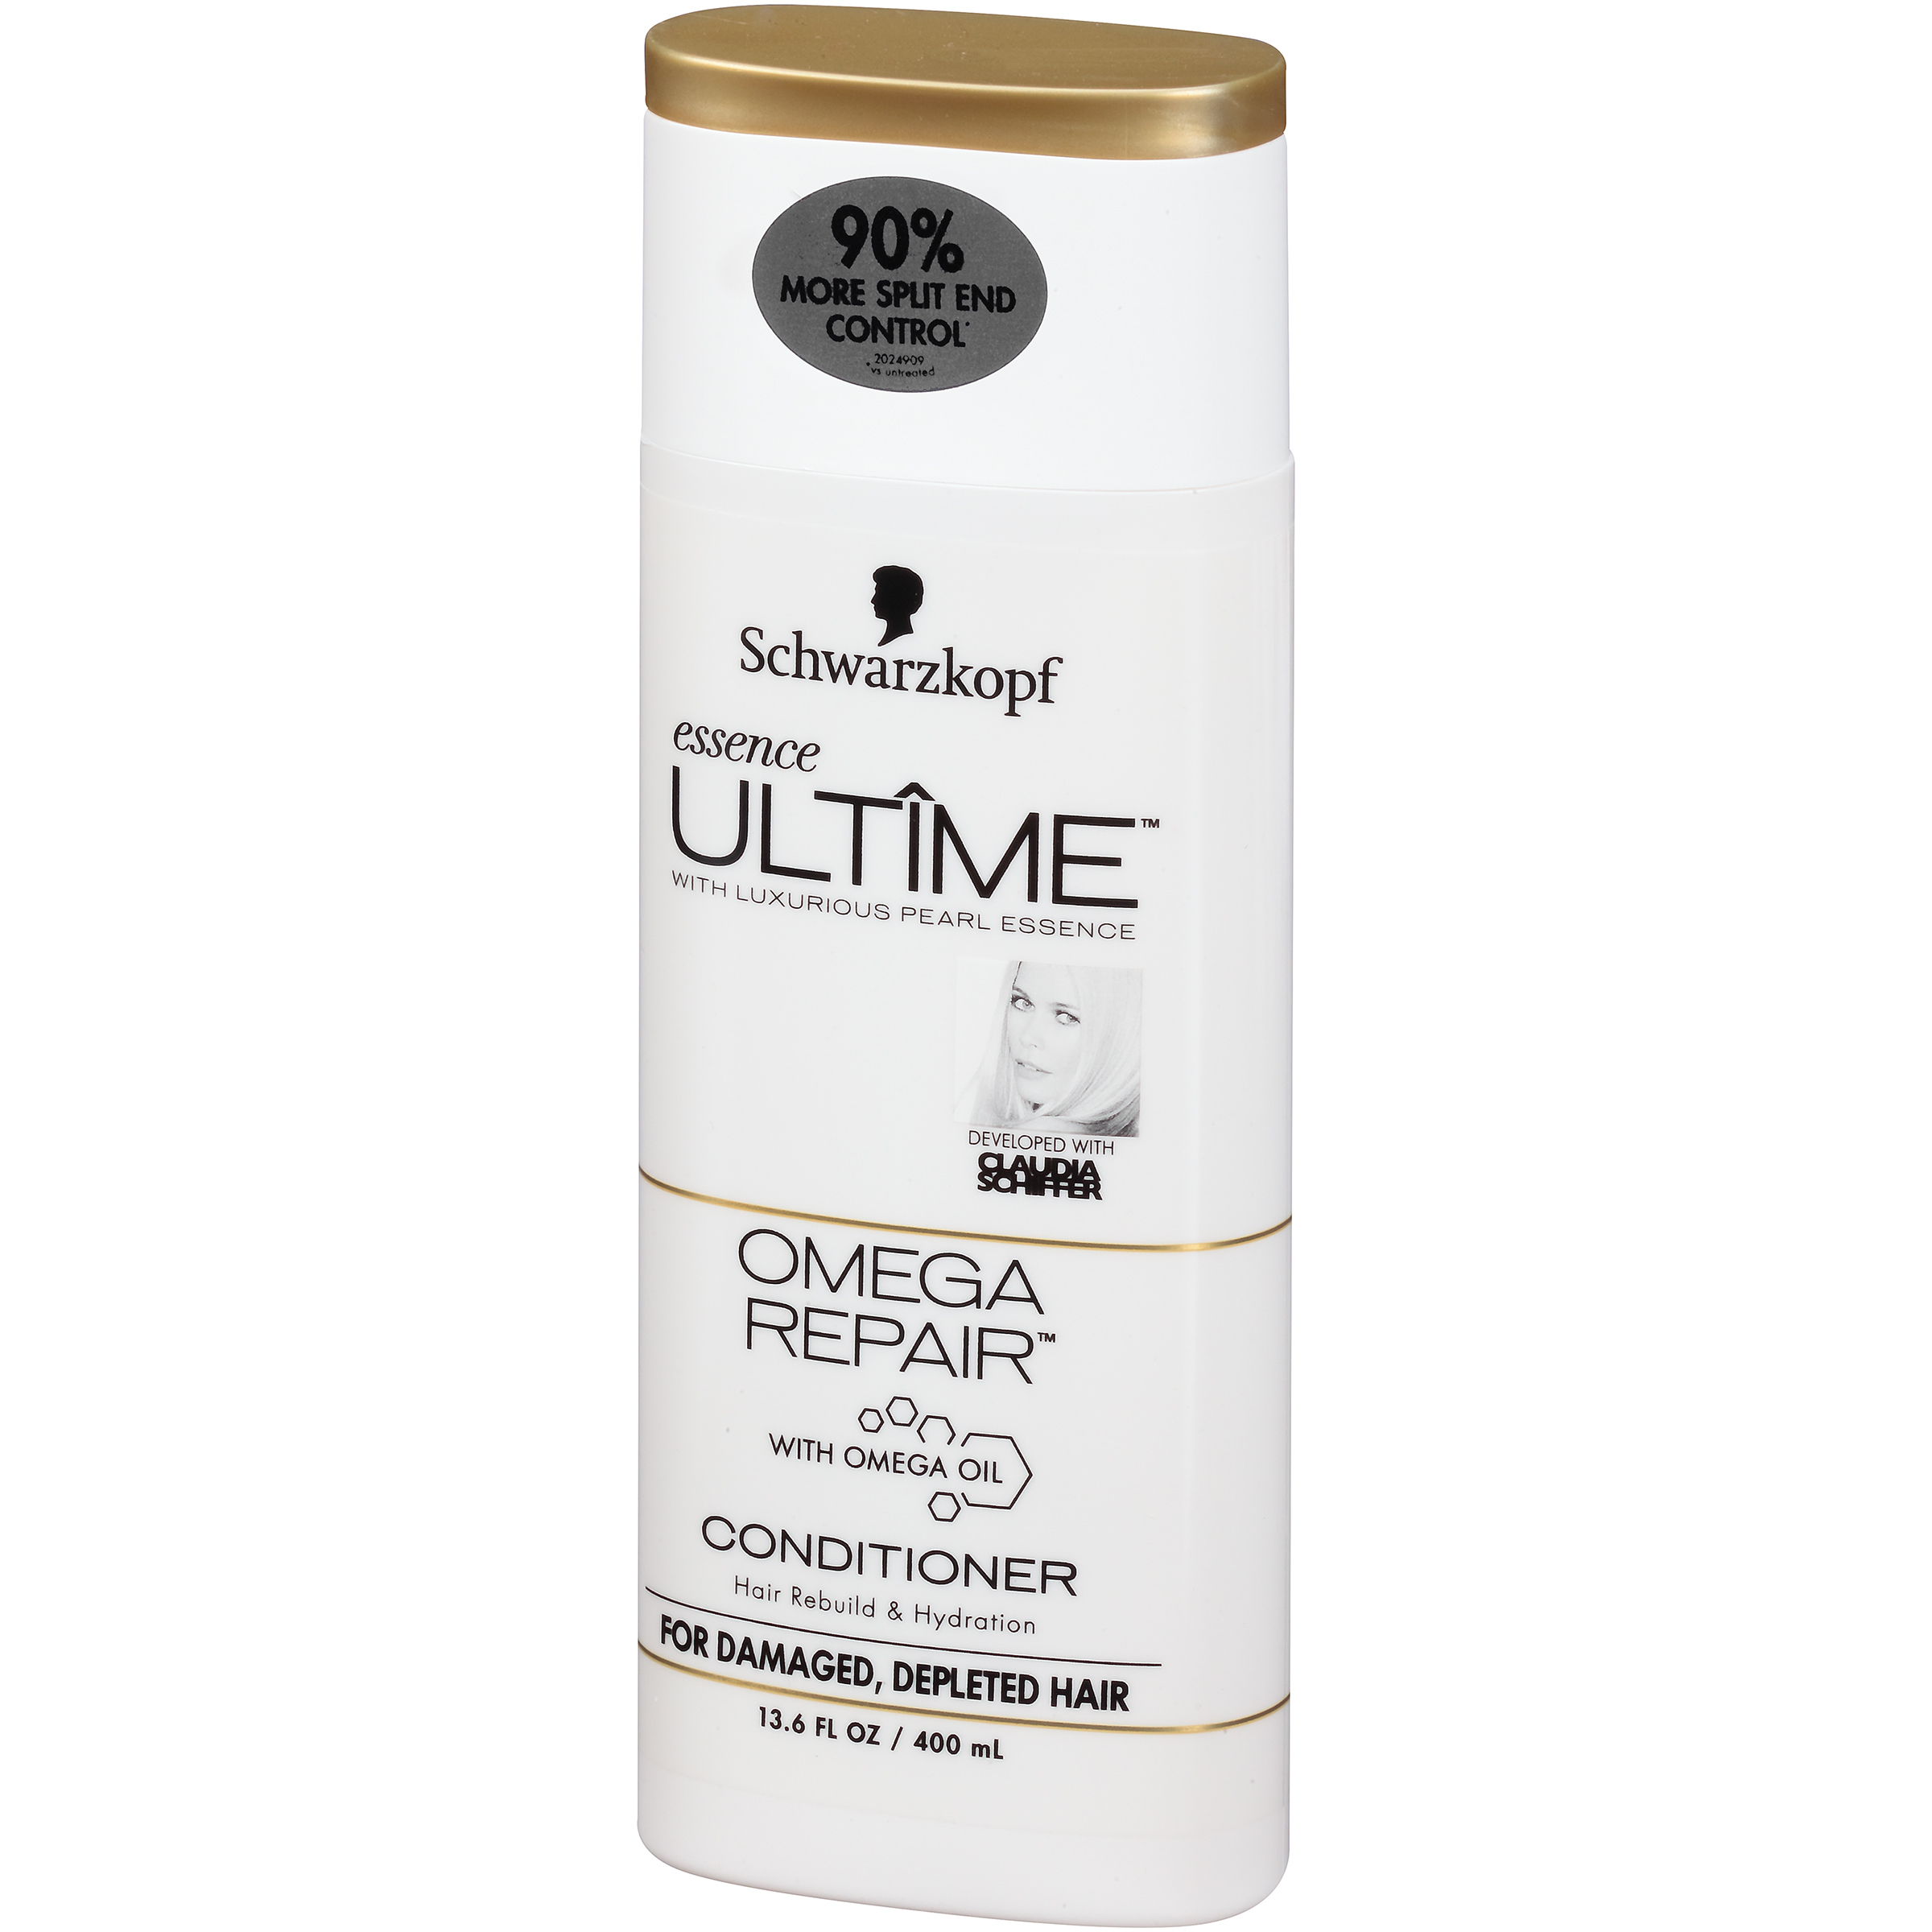 Ultime Conditioner Omega Repair 13.6oz 6 Pack - image 3 of 4